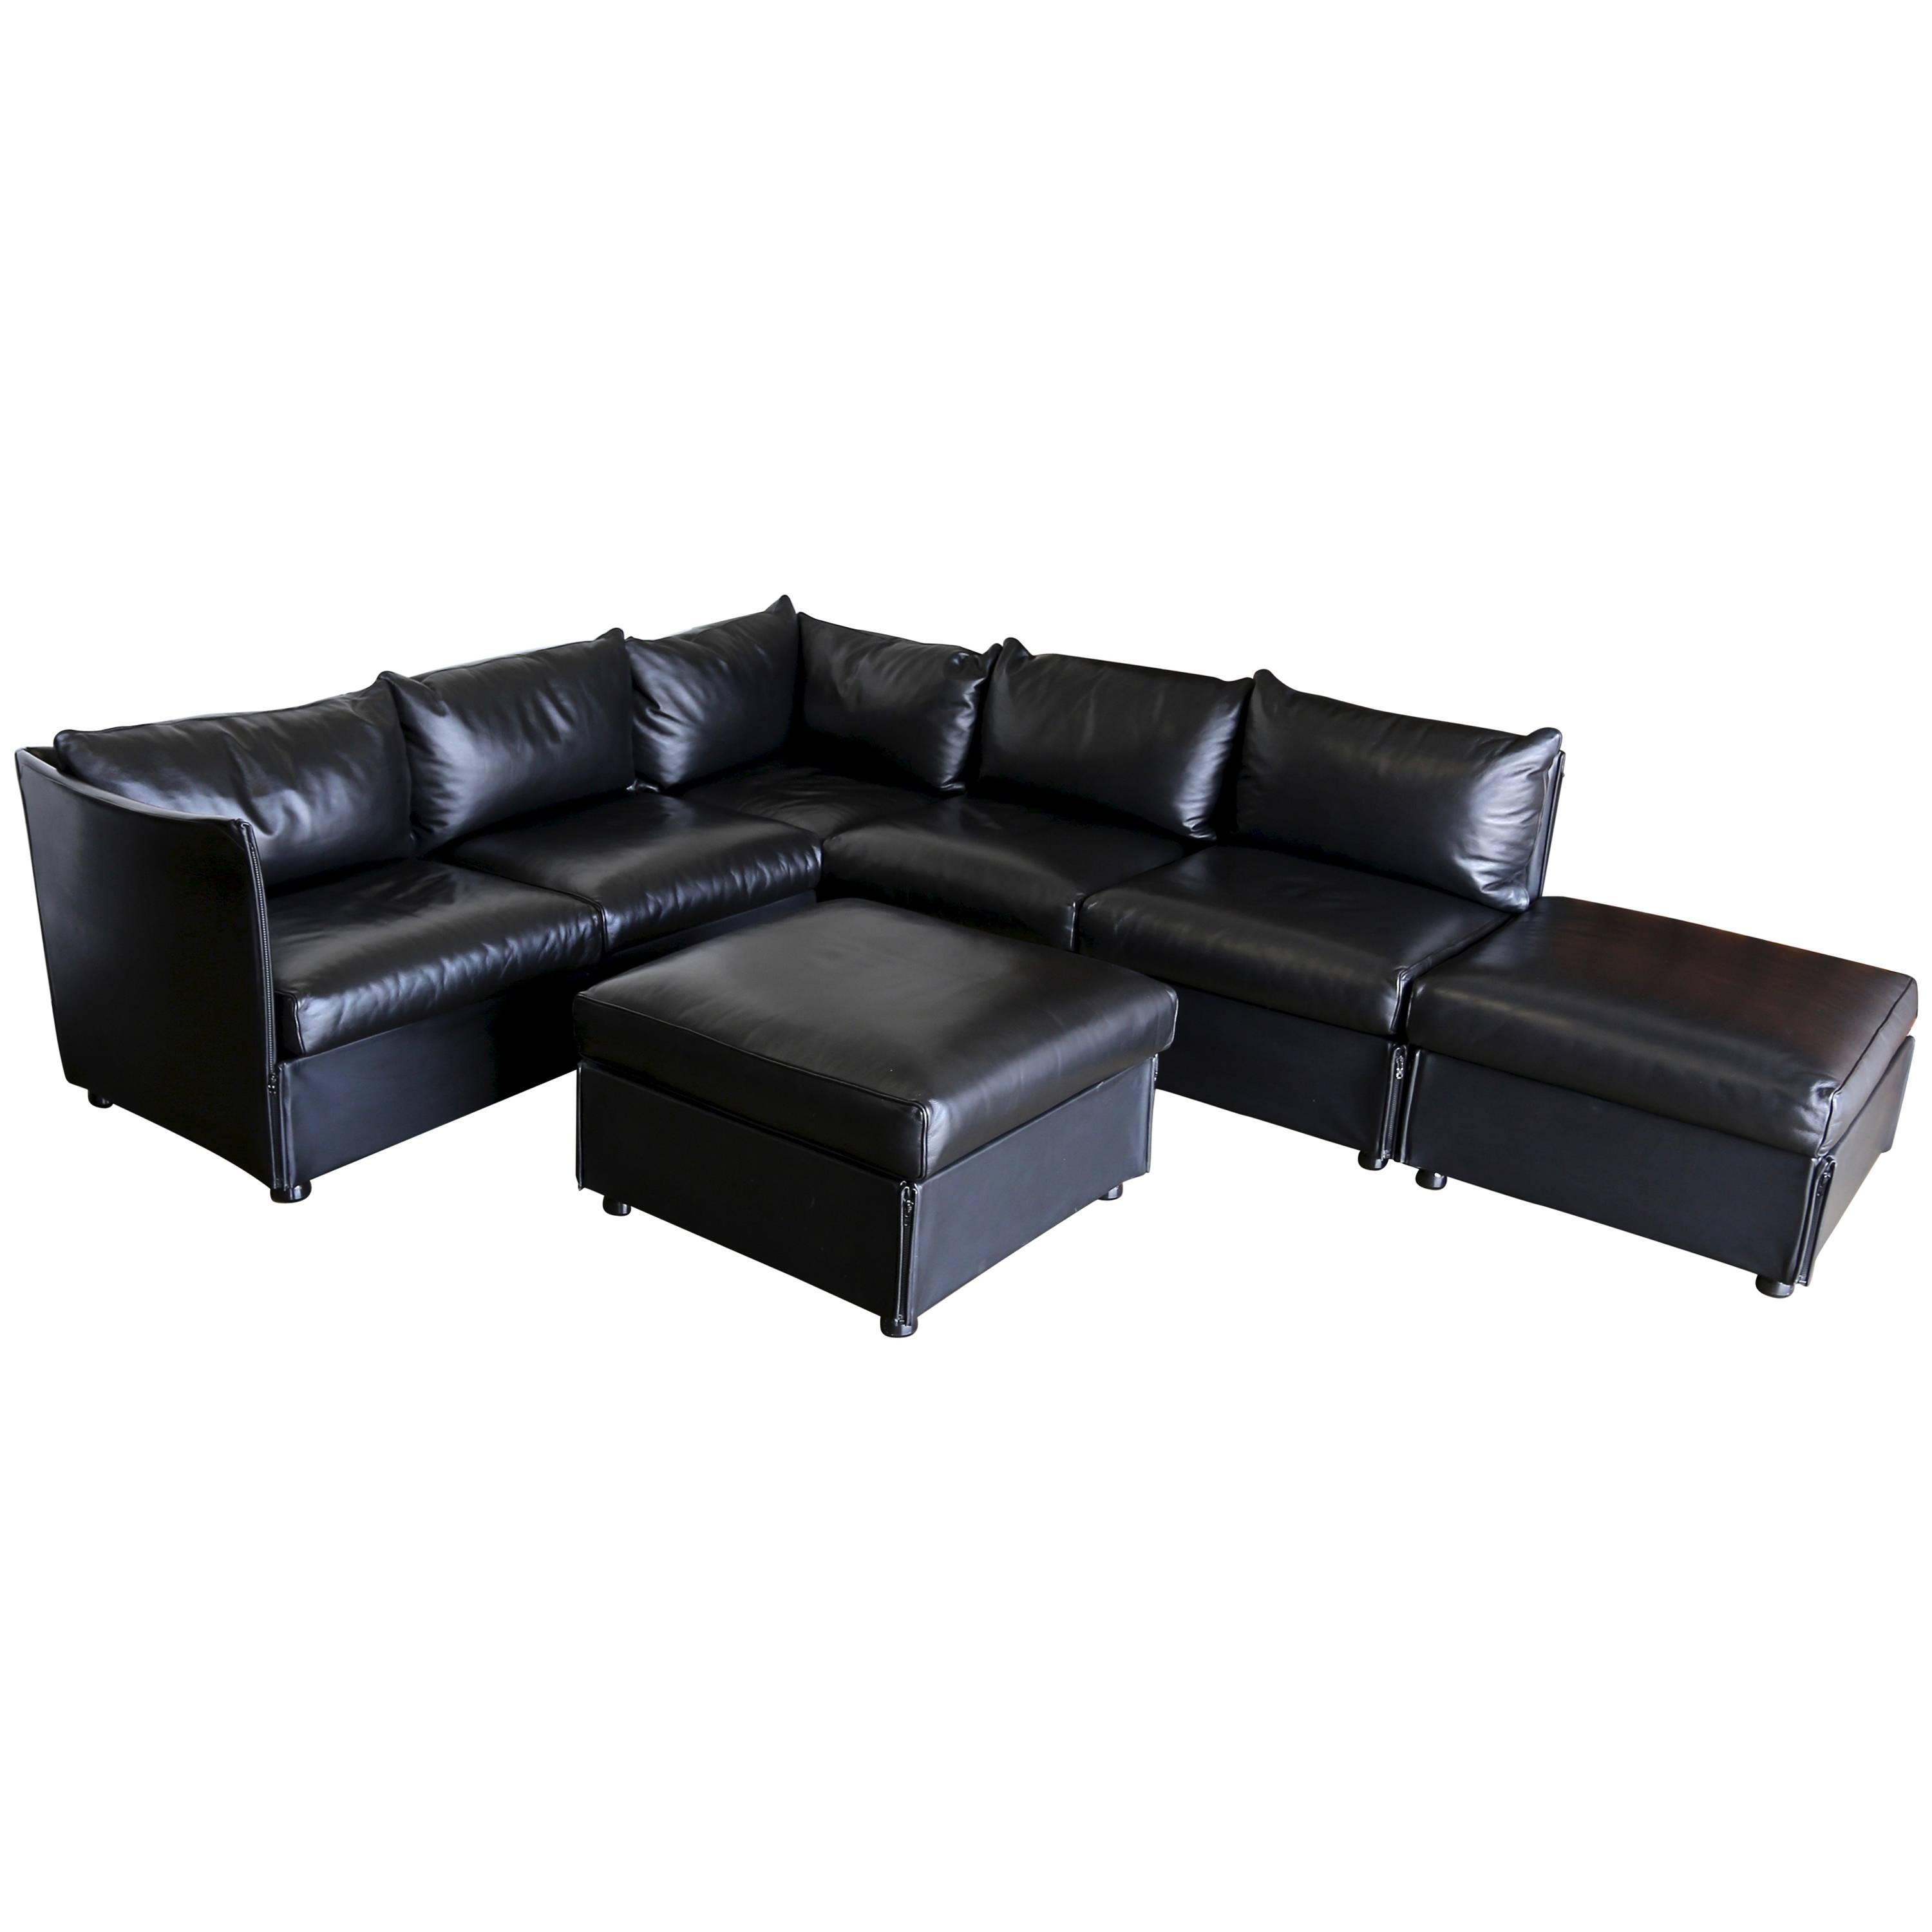 Modular Leather Char-a-Banc Sofa by Mario Bellin for Cassina